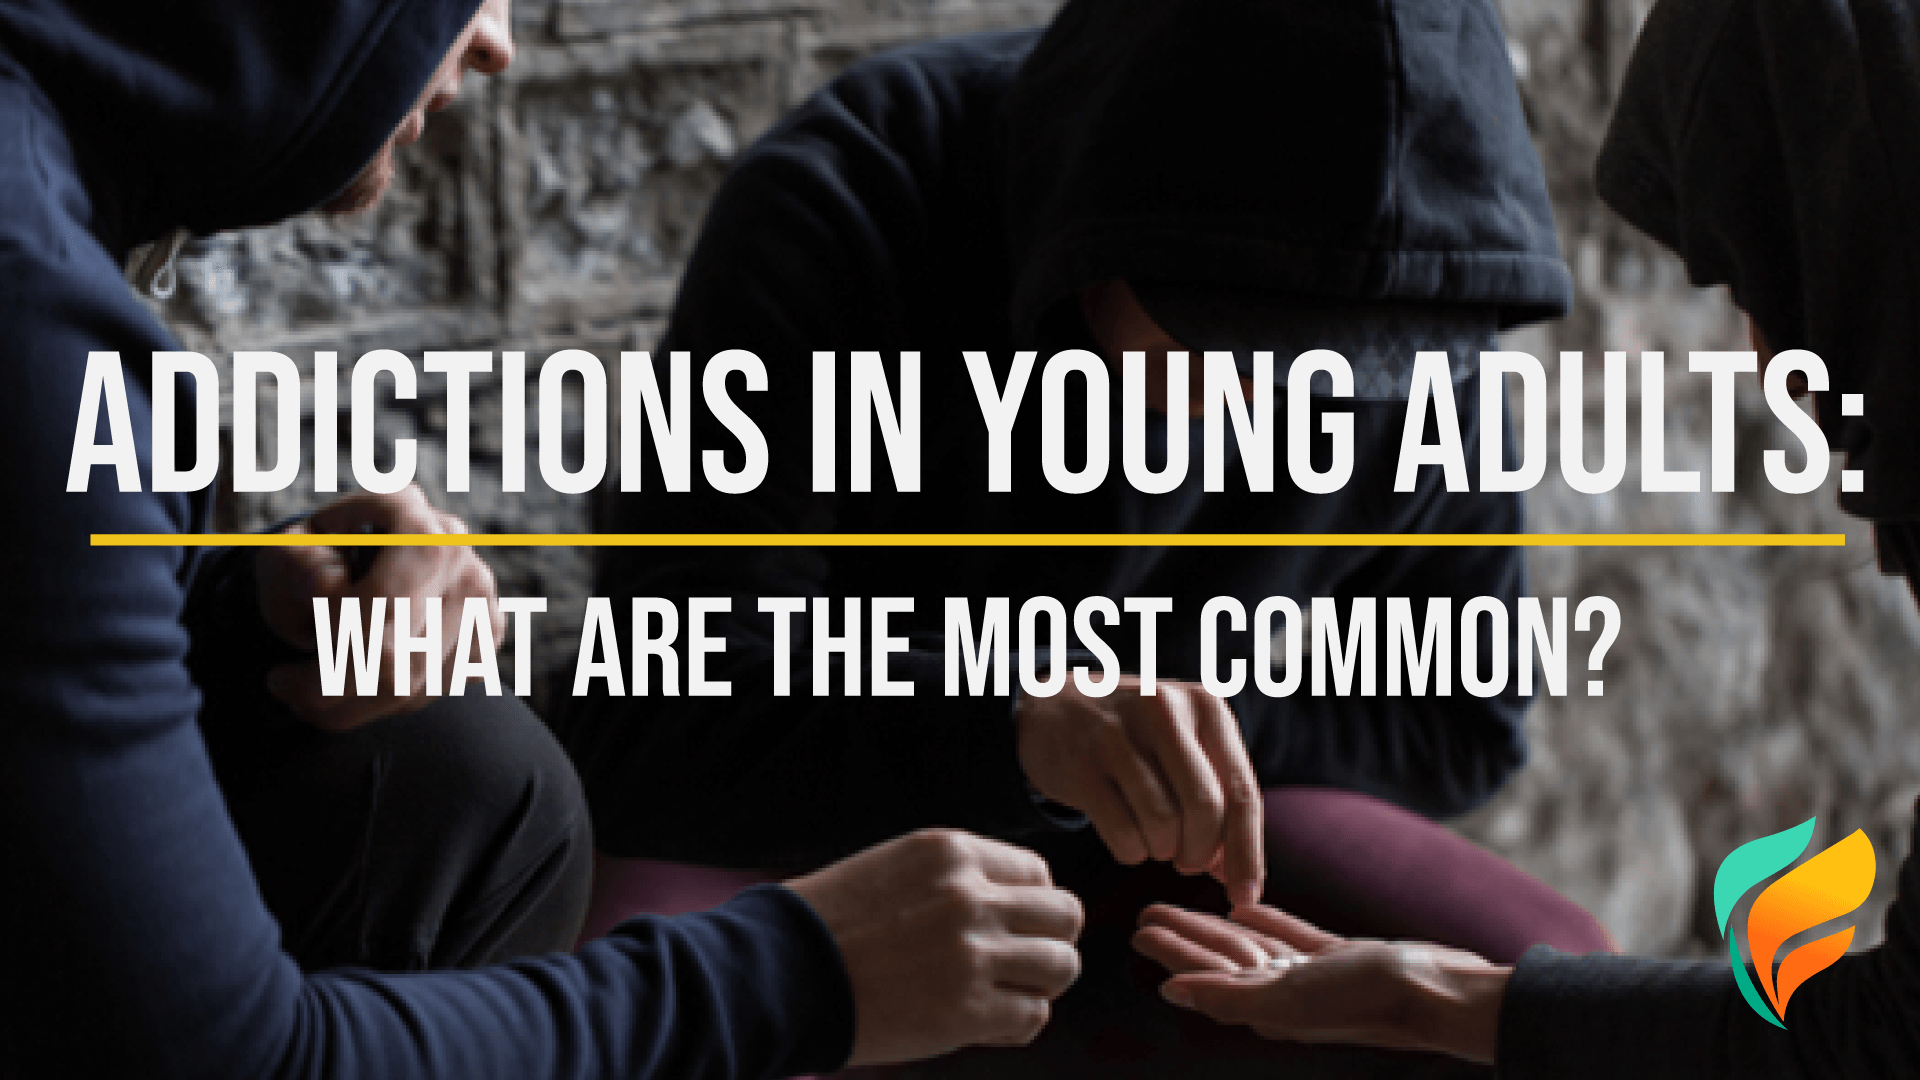 The Most Common Addictions in Young Adults